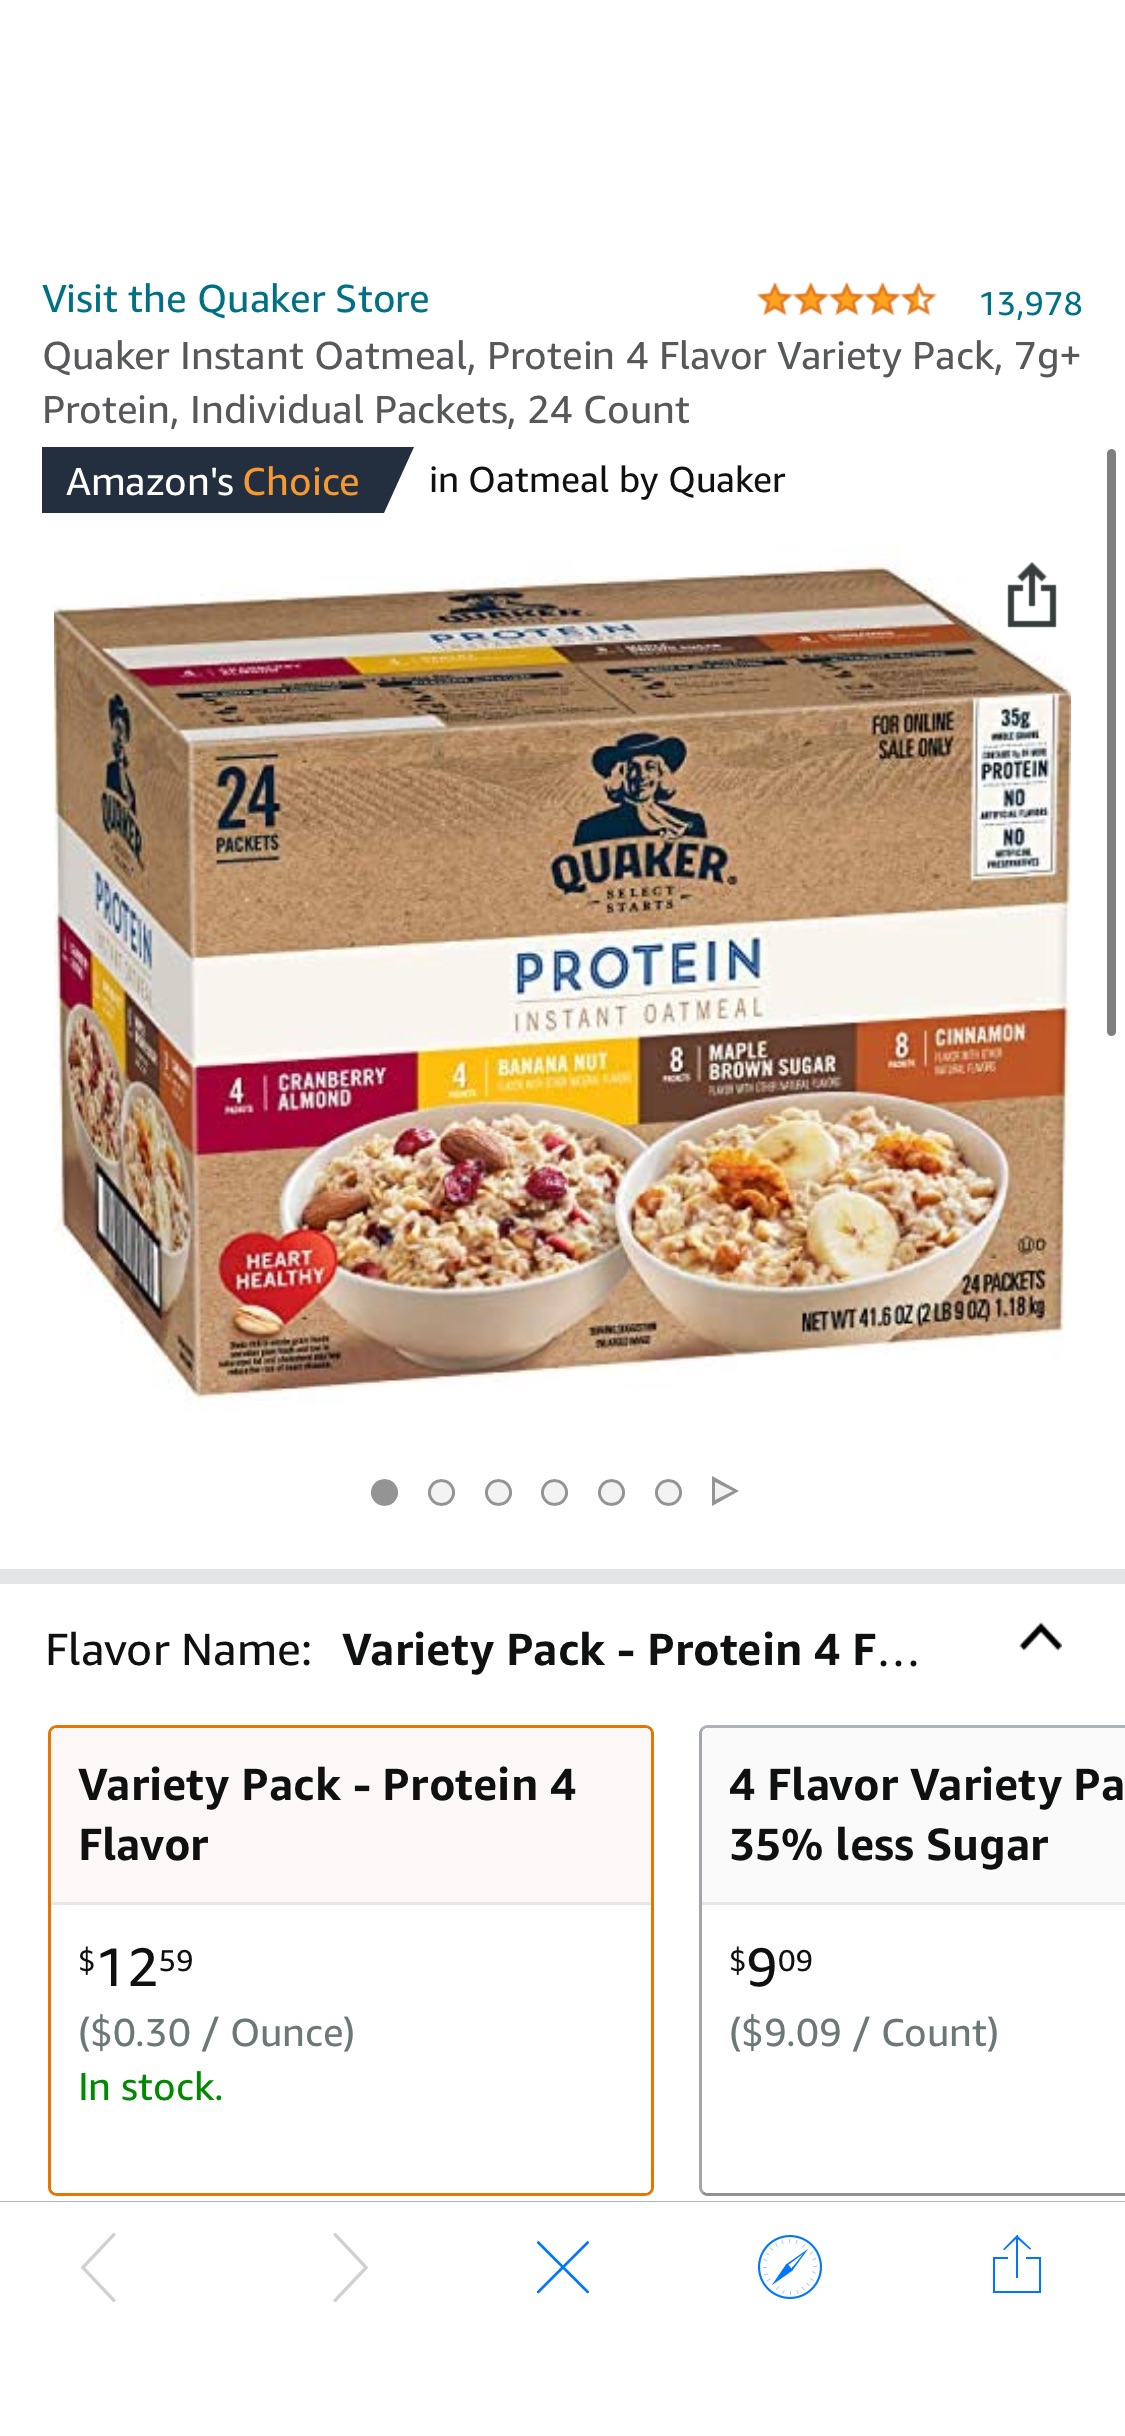 Amazon.com: Quaker Instant Oatmeal, Protein 4 Flavor Variety Pack, 7g+ Protein, Individual Packets, 24 Count食燕麦片